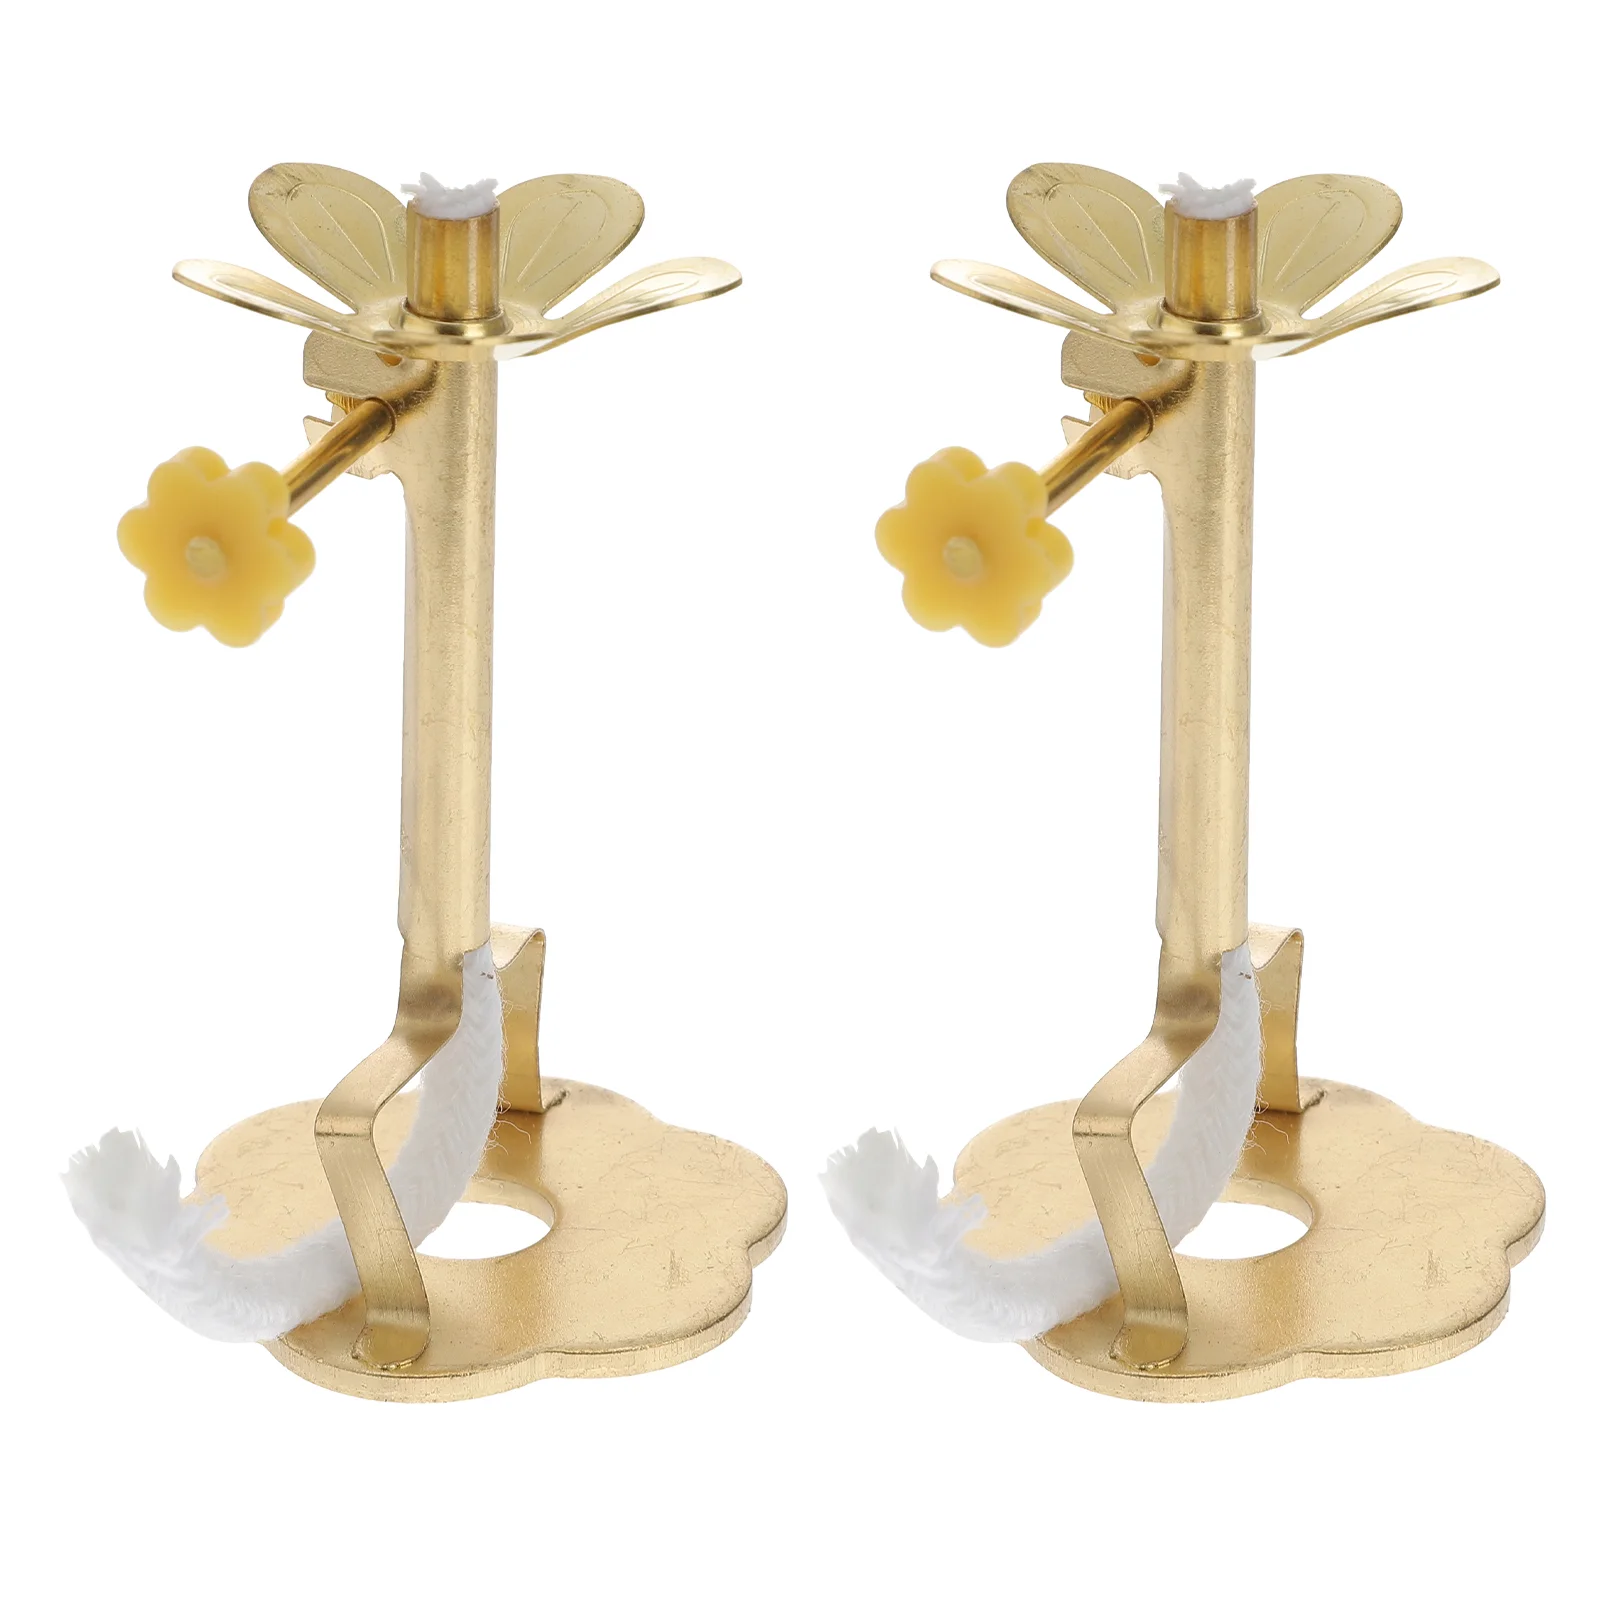 

2 Pcs Lamp Holder Hall Supply Home Ornament Telescopic Wick Supplies Stand Decorative